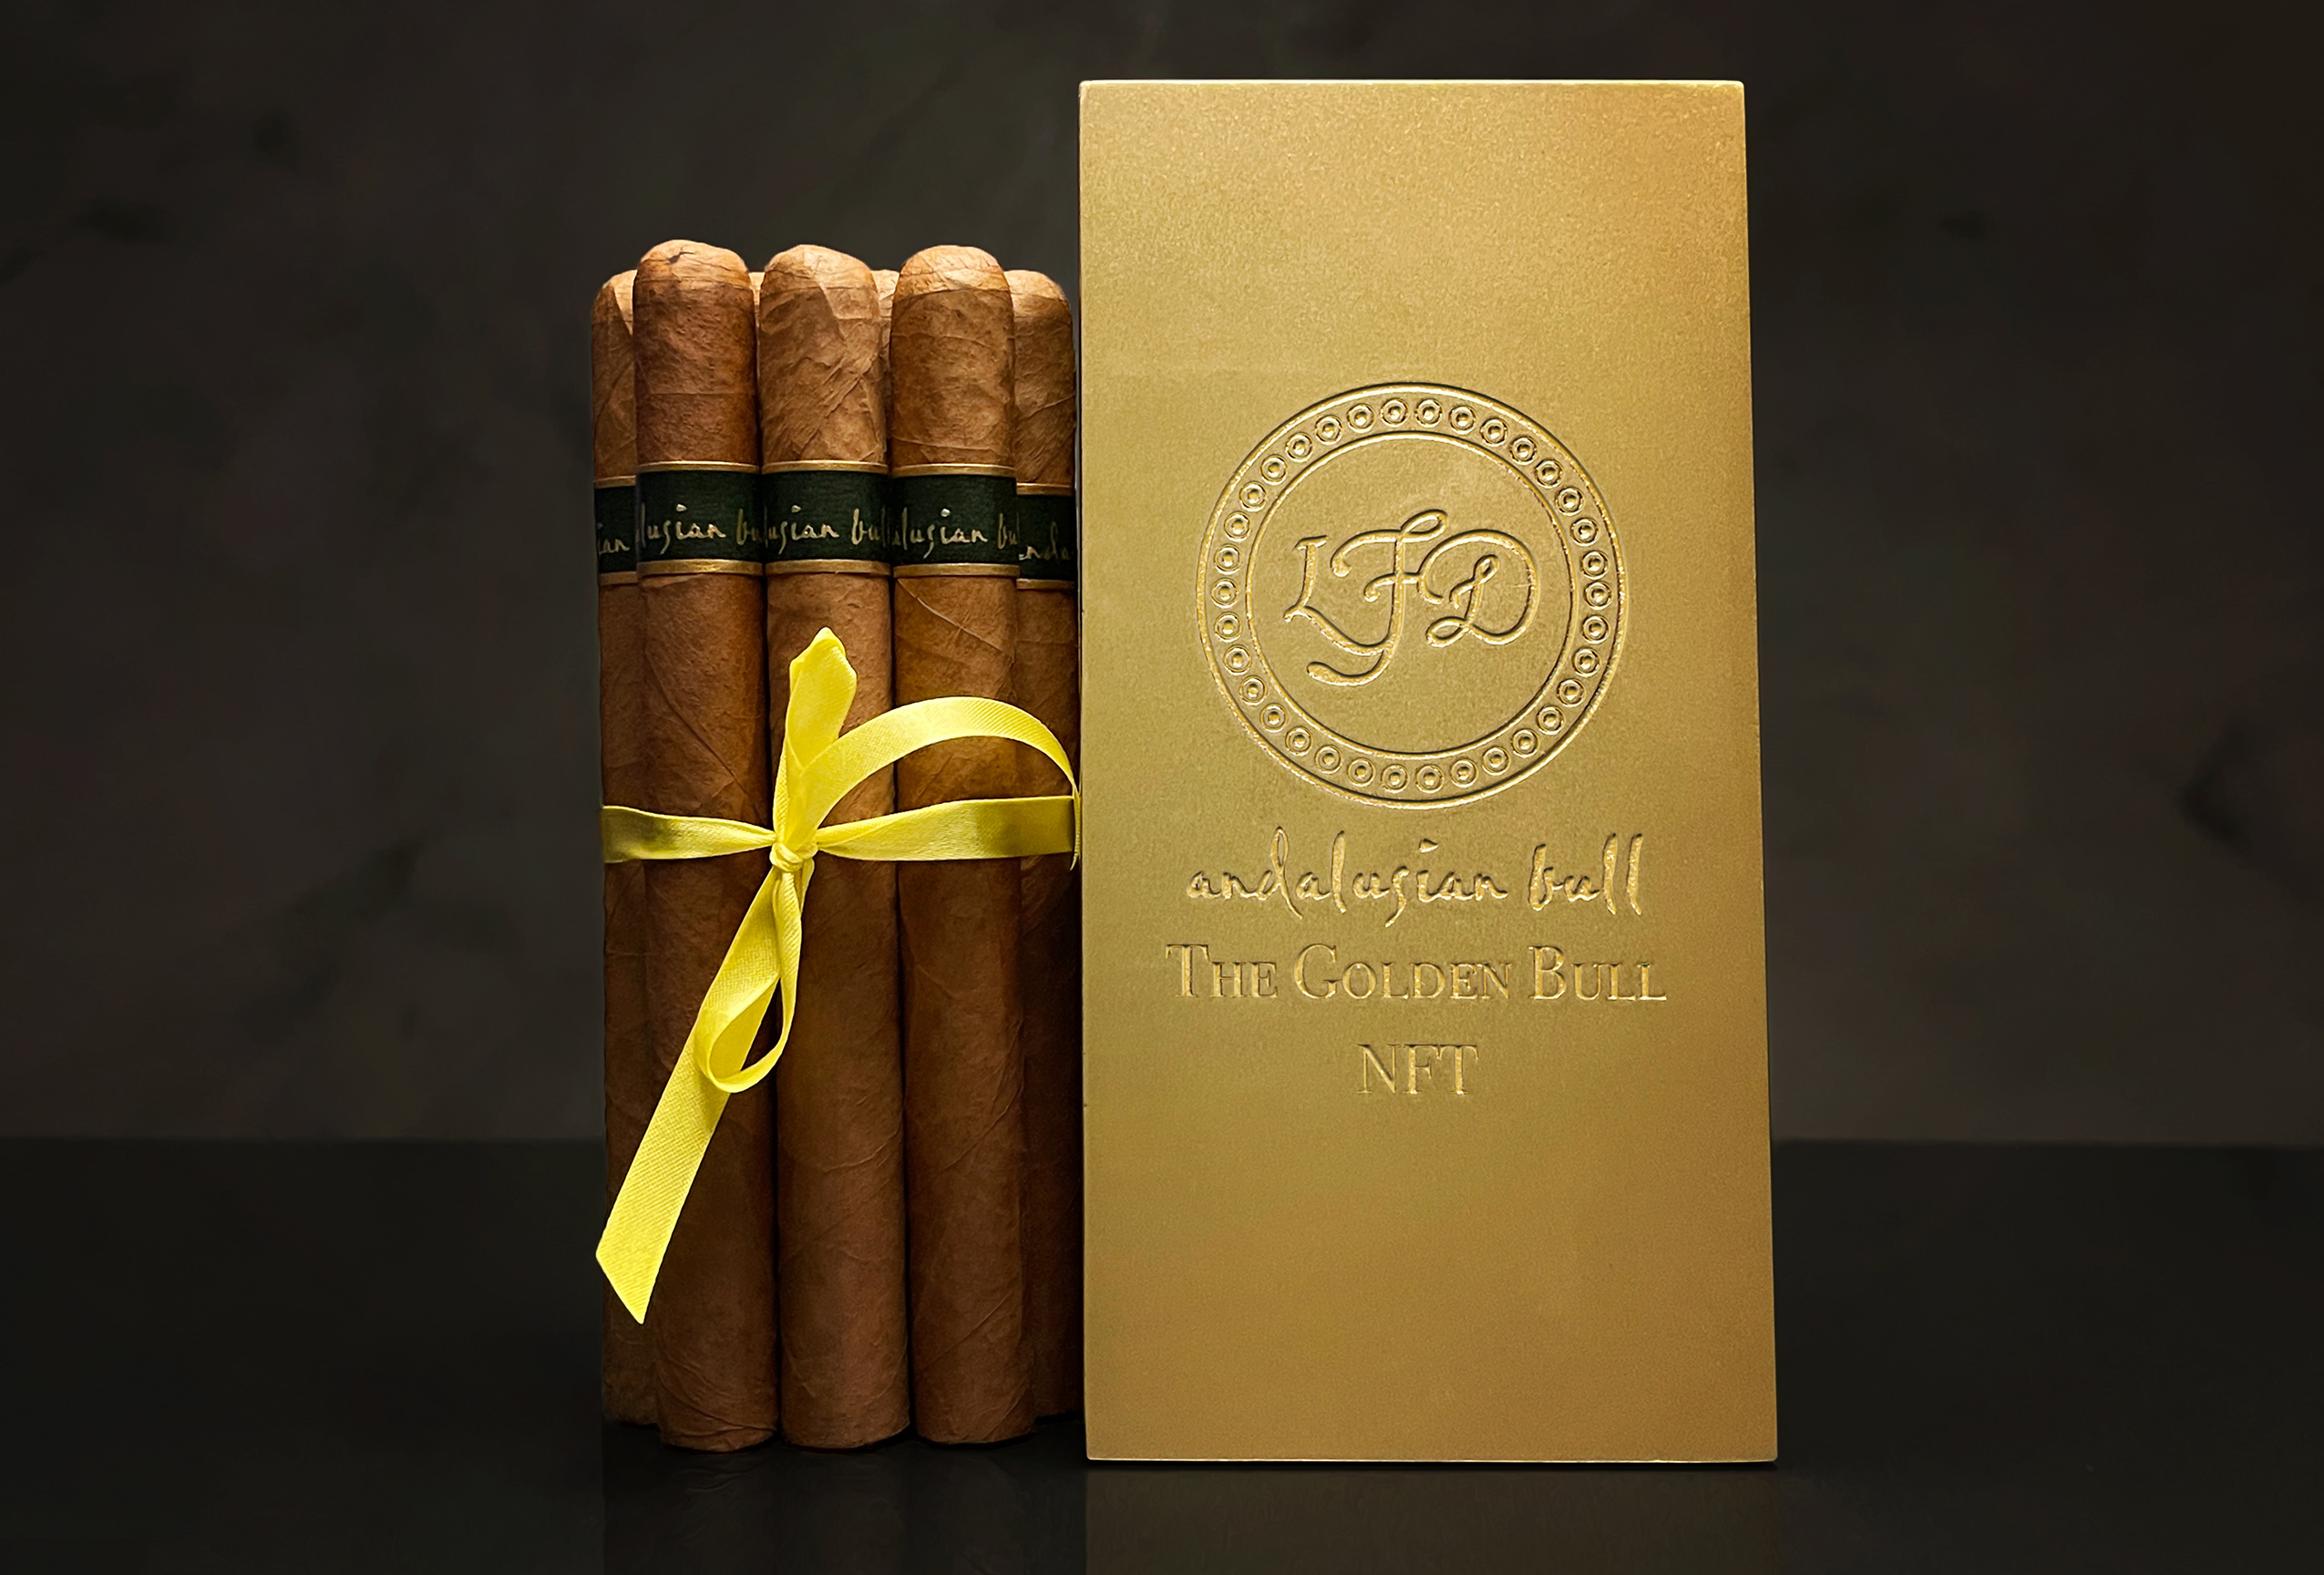 La Flor Dominicana Releasing NFT Project for Andalusian Bull | halfwheel